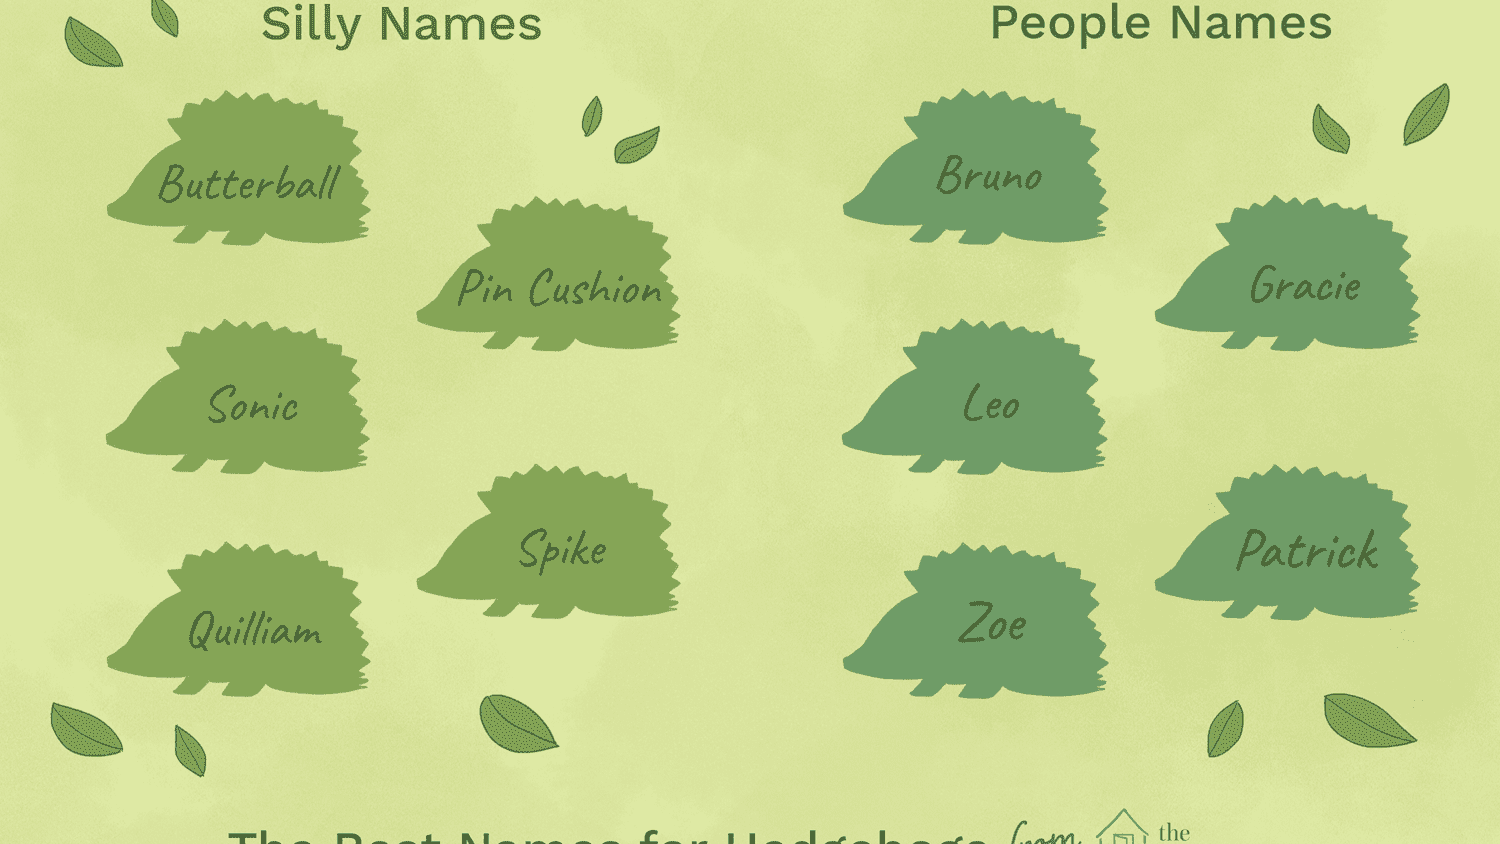 What are other names for the hedgehog?